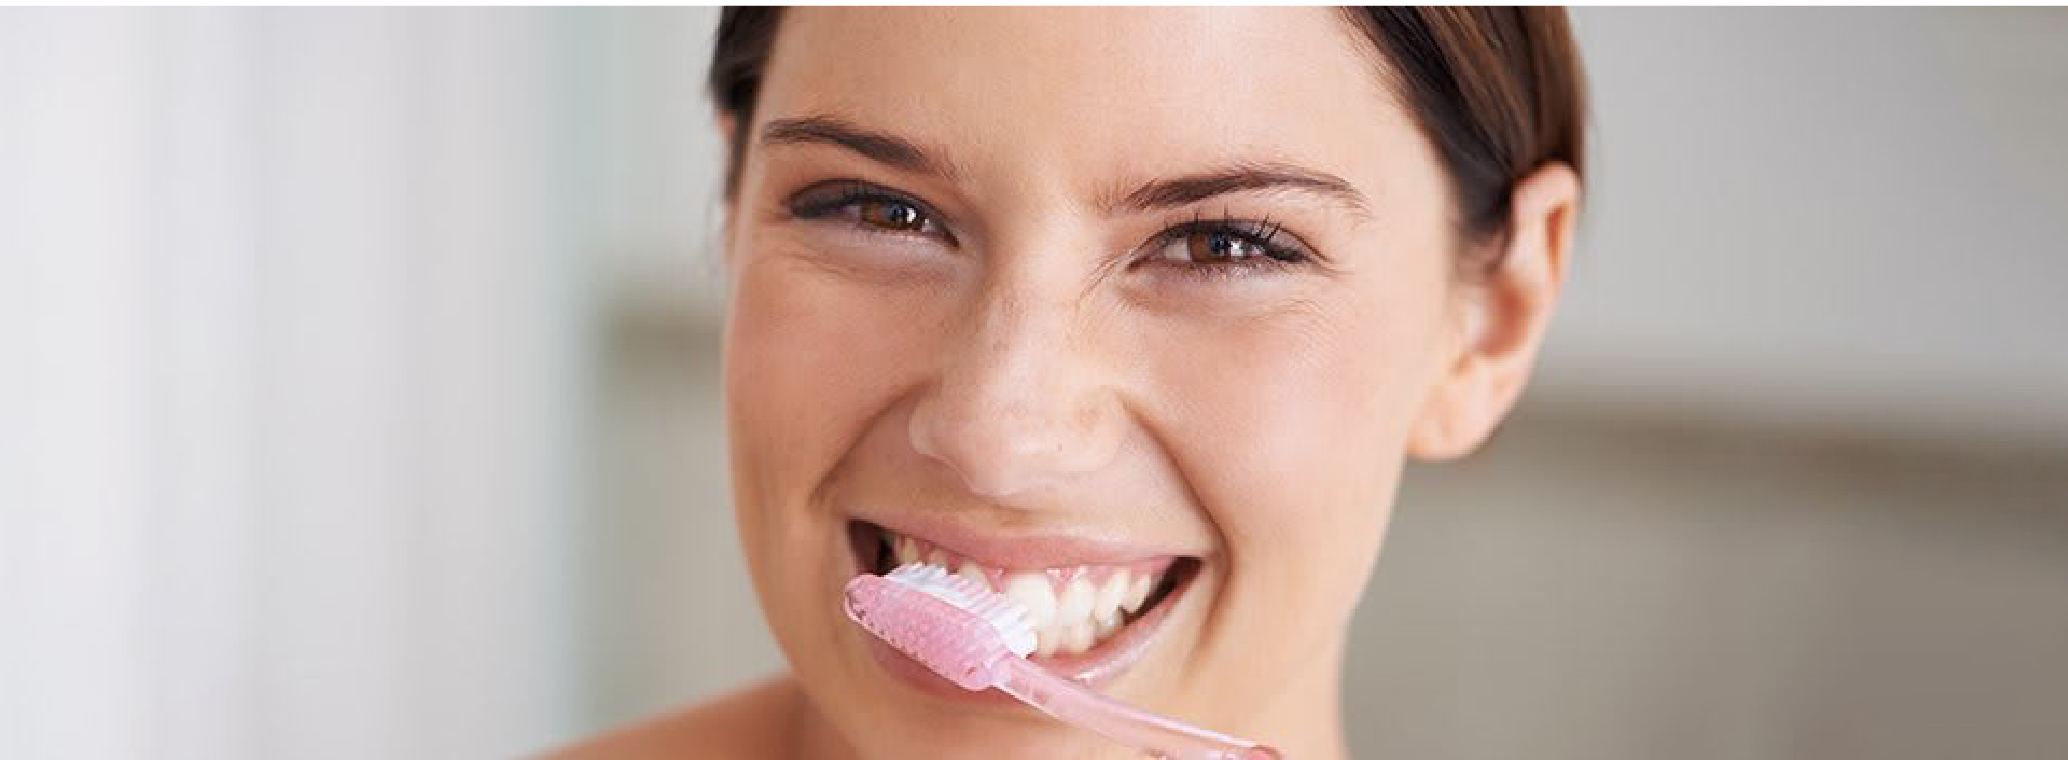 Sore Gums: Causes, Treatments and Relief for Sensitive Gums